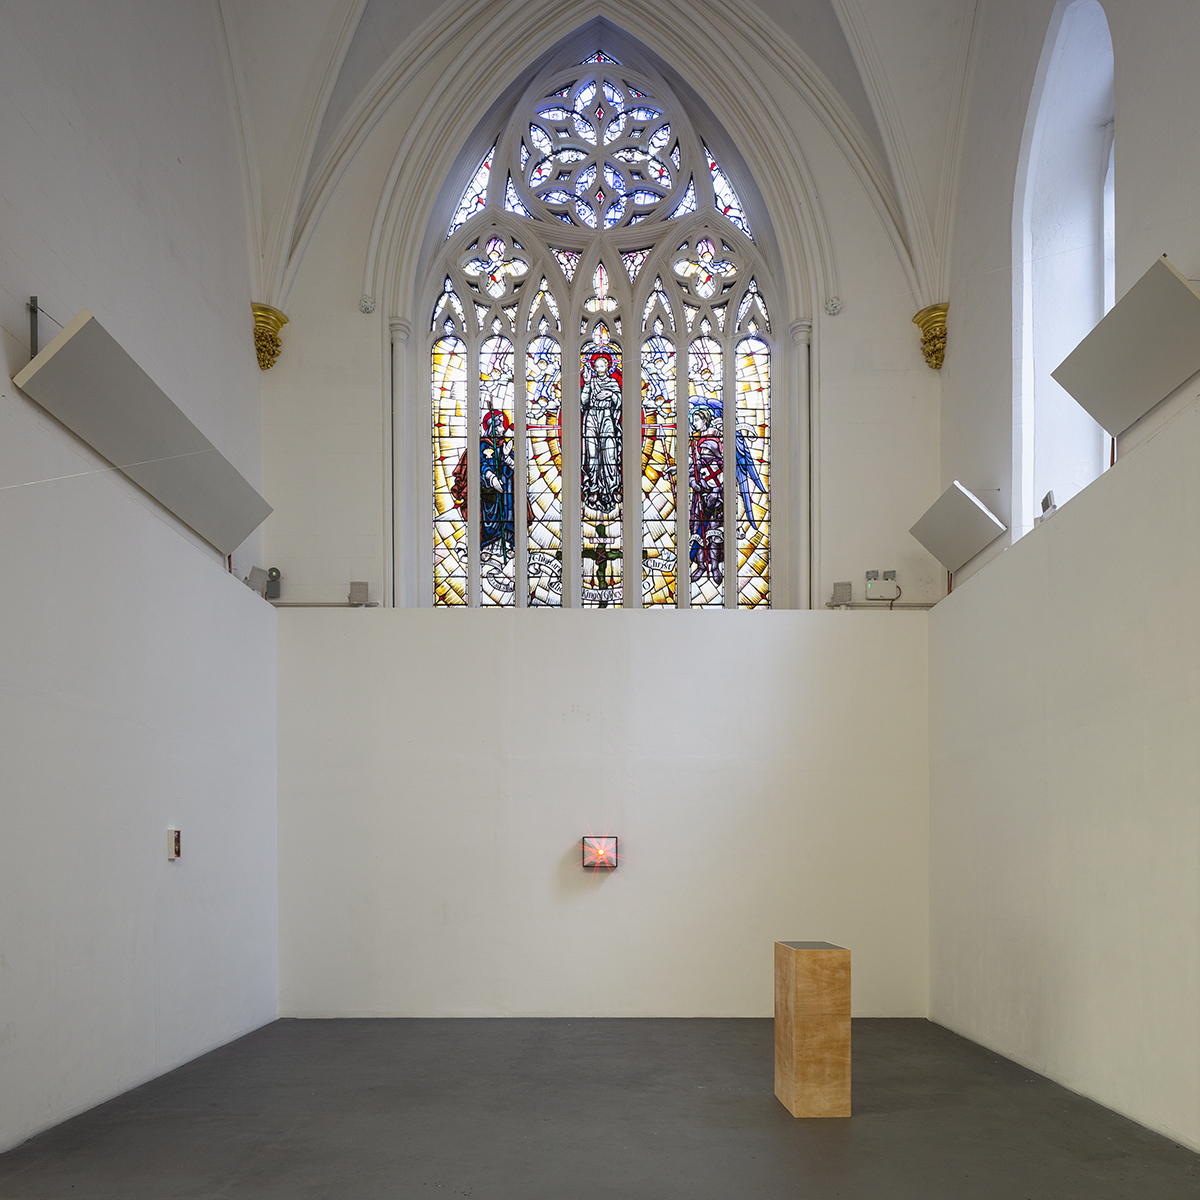 Installation view of sculptures made from Thermoformed PET, laser pointer, UV print on acrylic and glue, situated in a Church, beneath a stained-glass window.